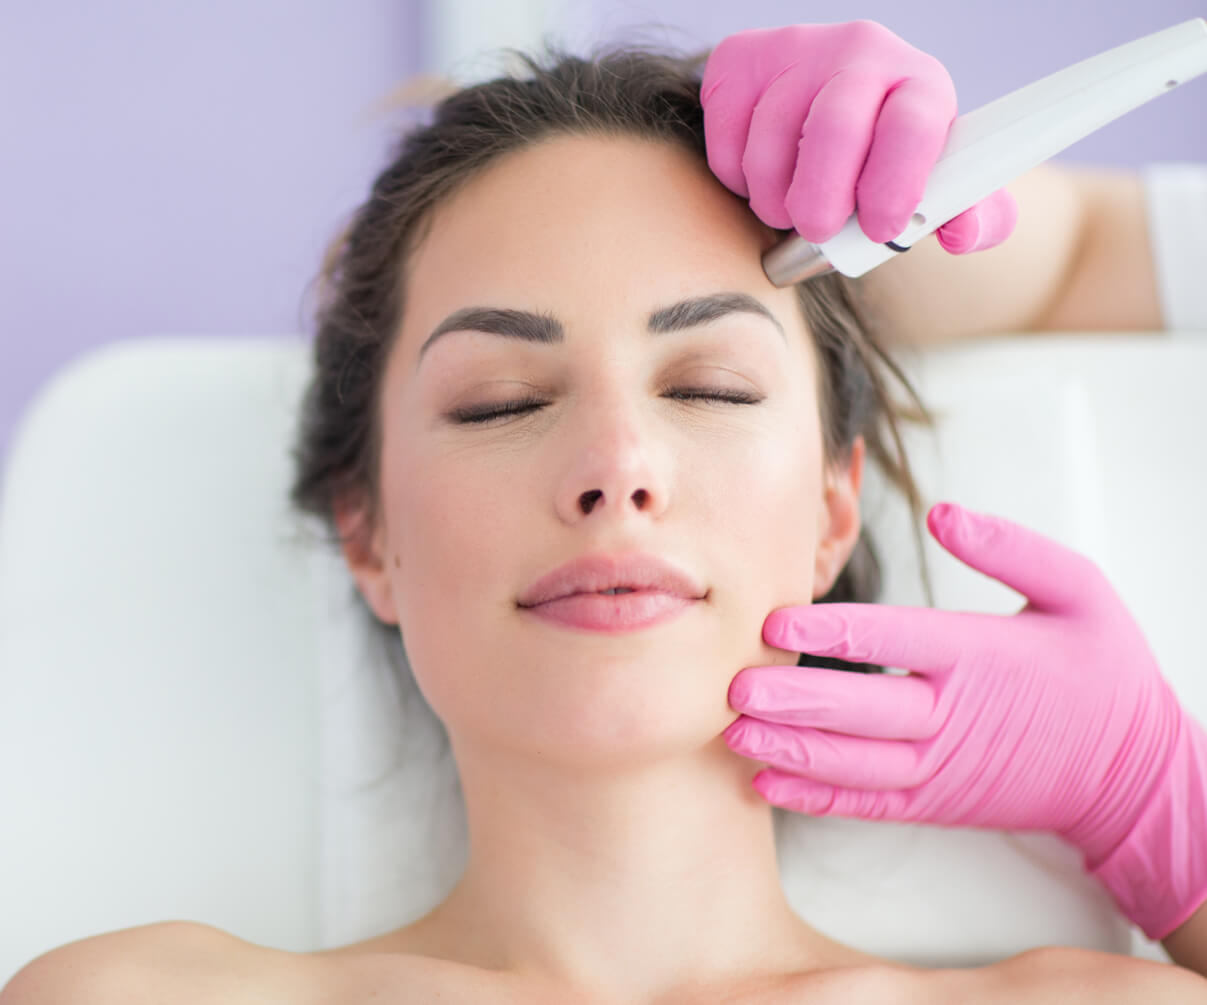 Radiofrequency Microneedling at Essential Aesthetics